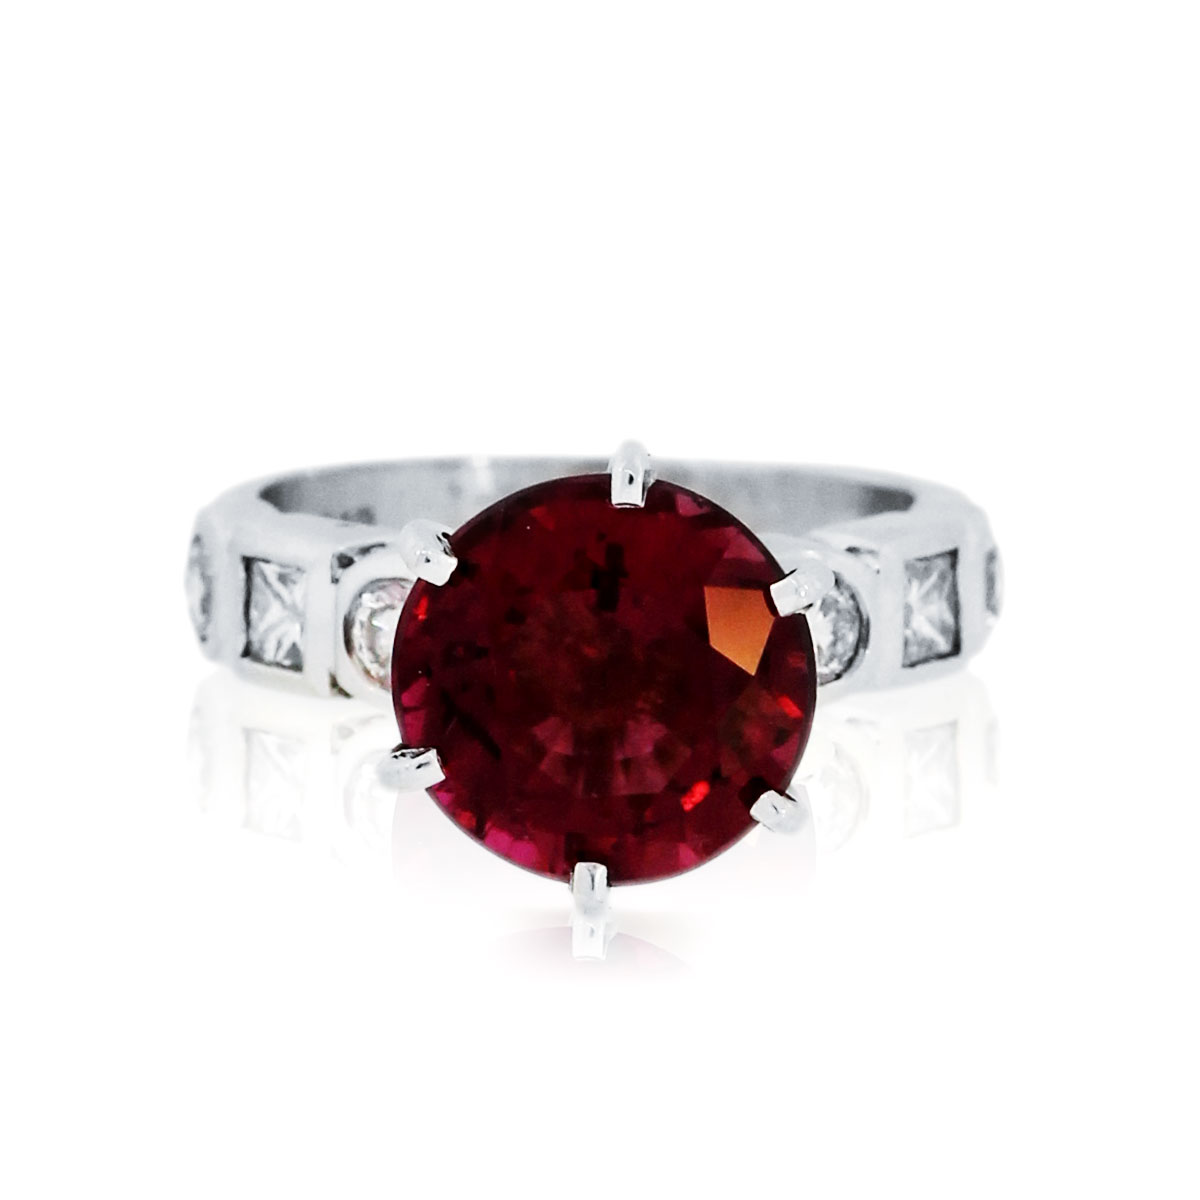 You are viewing this 14K White Gold Pink Tourmaline & Diamond Ring